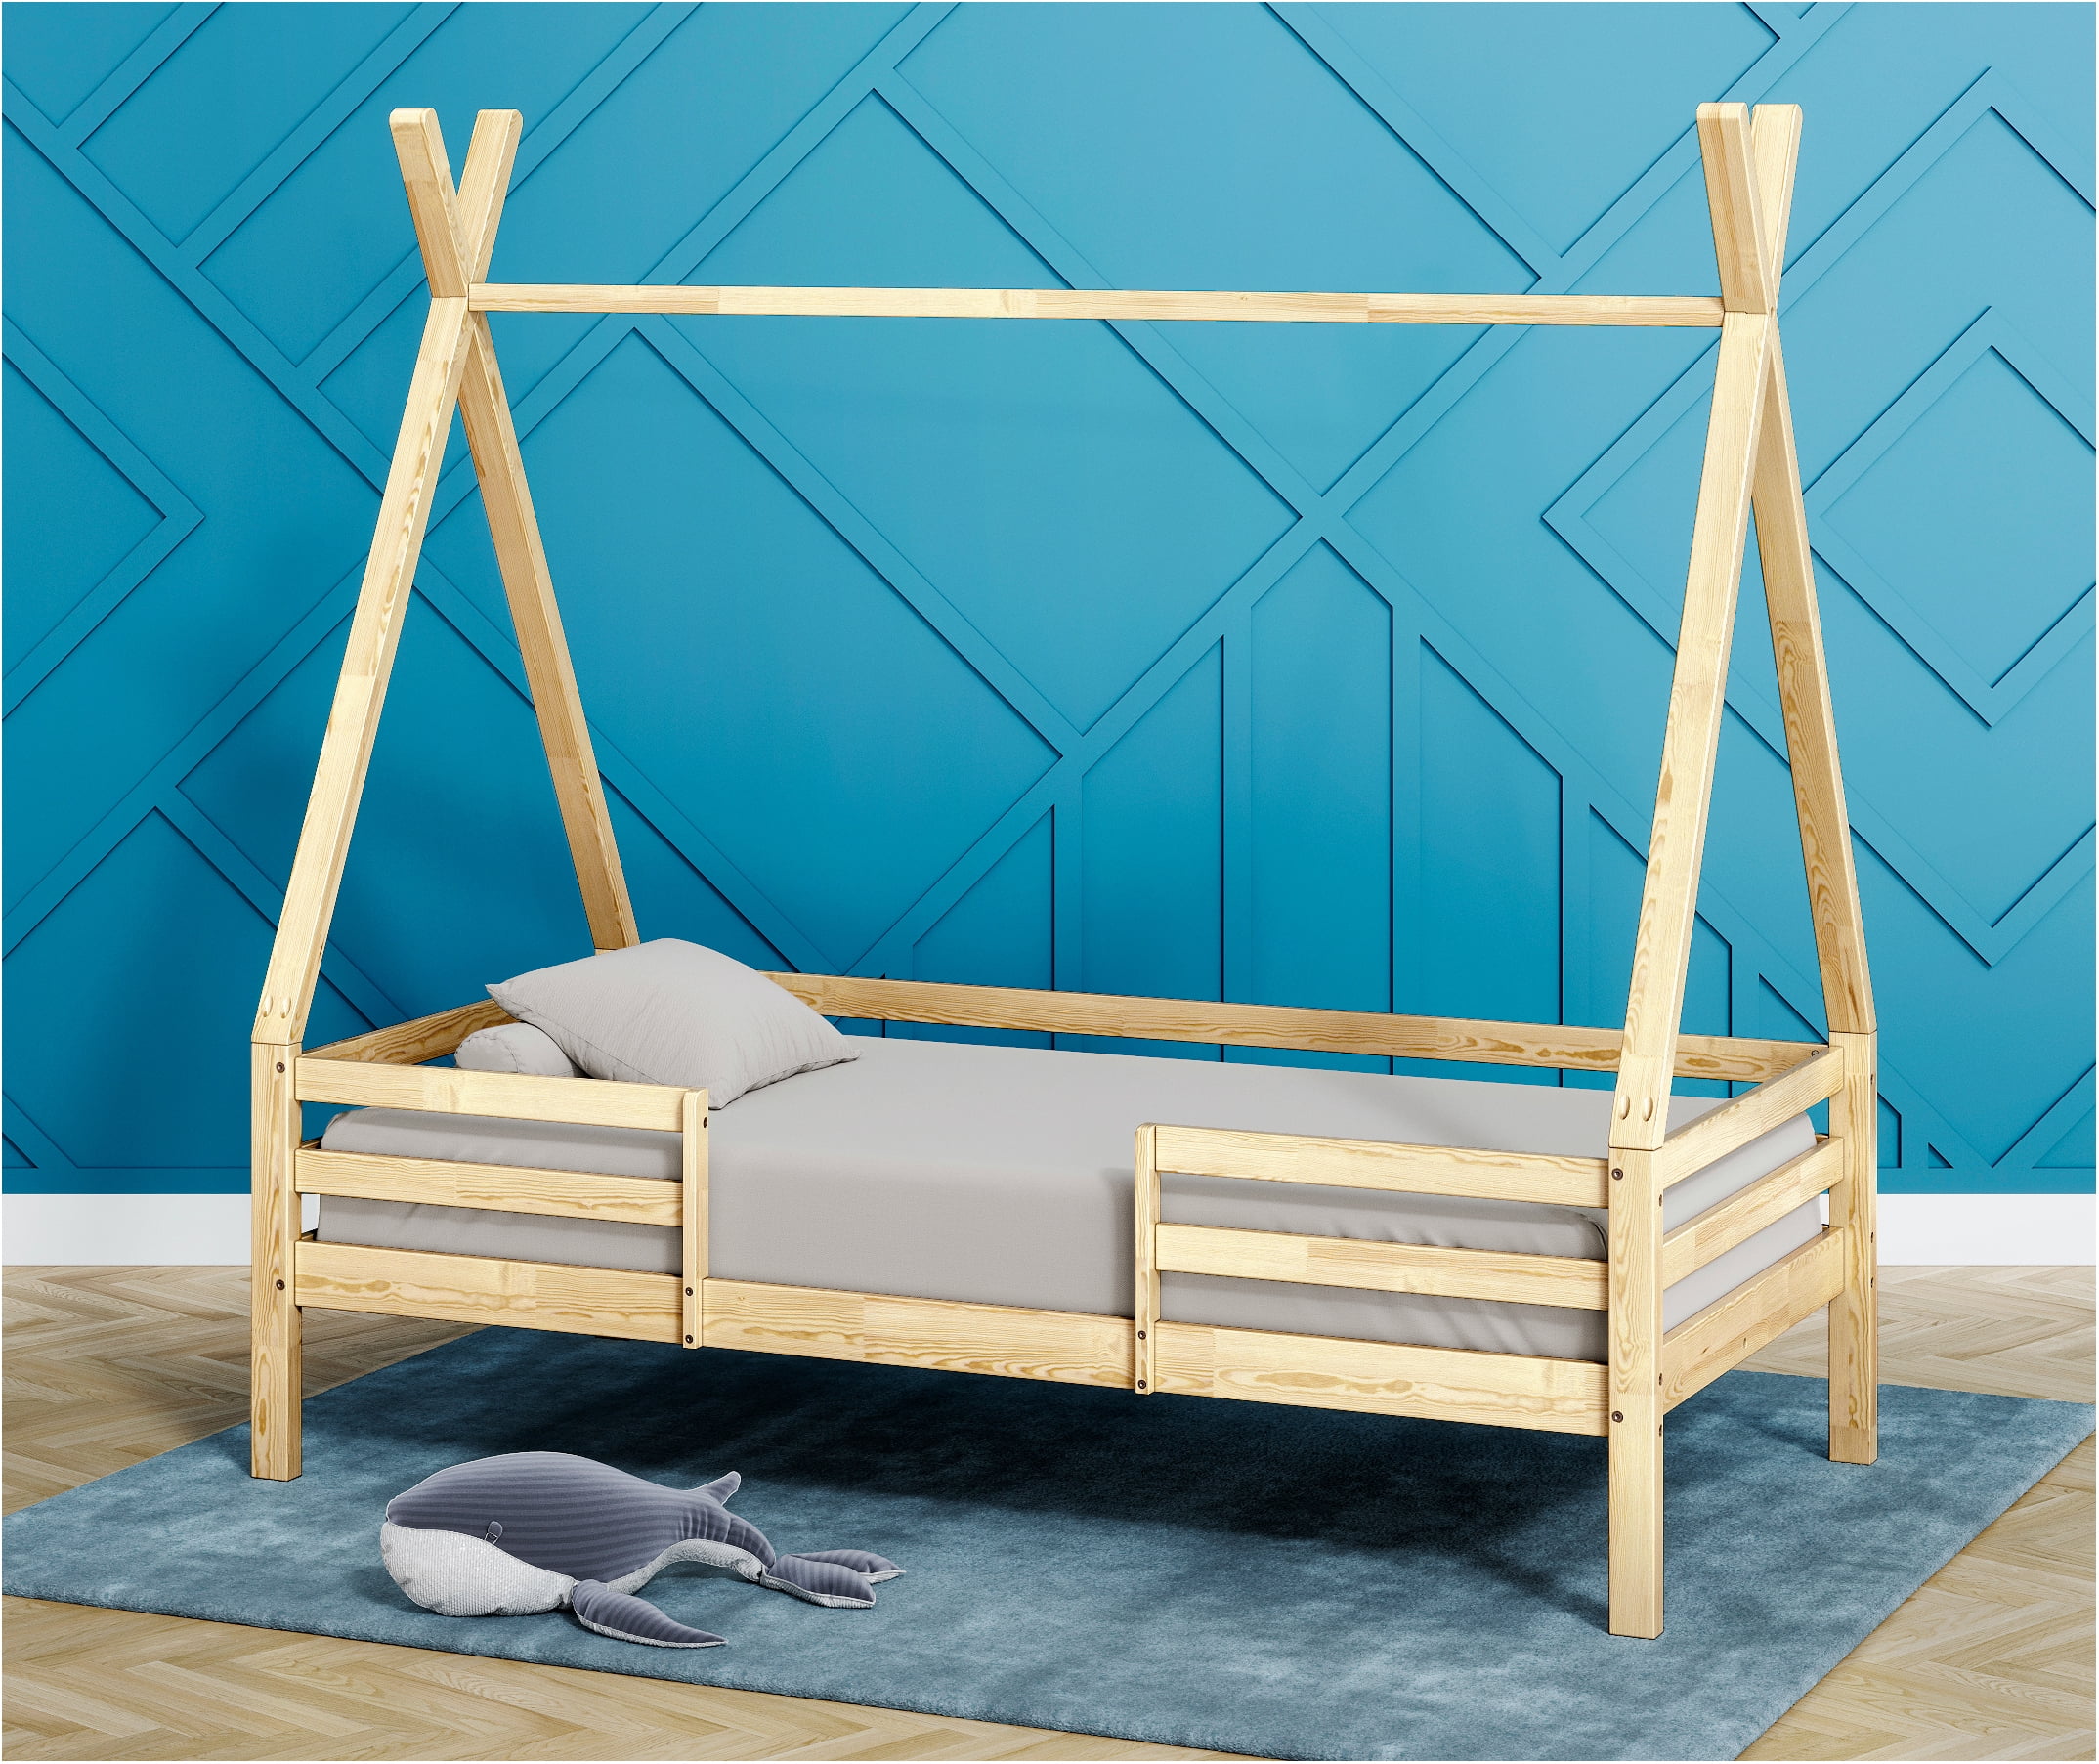 House Bed with Rails - All Solid Wood Teepee Bed for Kids - Toddler House Bed Frame with Rails and Legs - Roof and Fence - Twin Size - Natural Wood Color